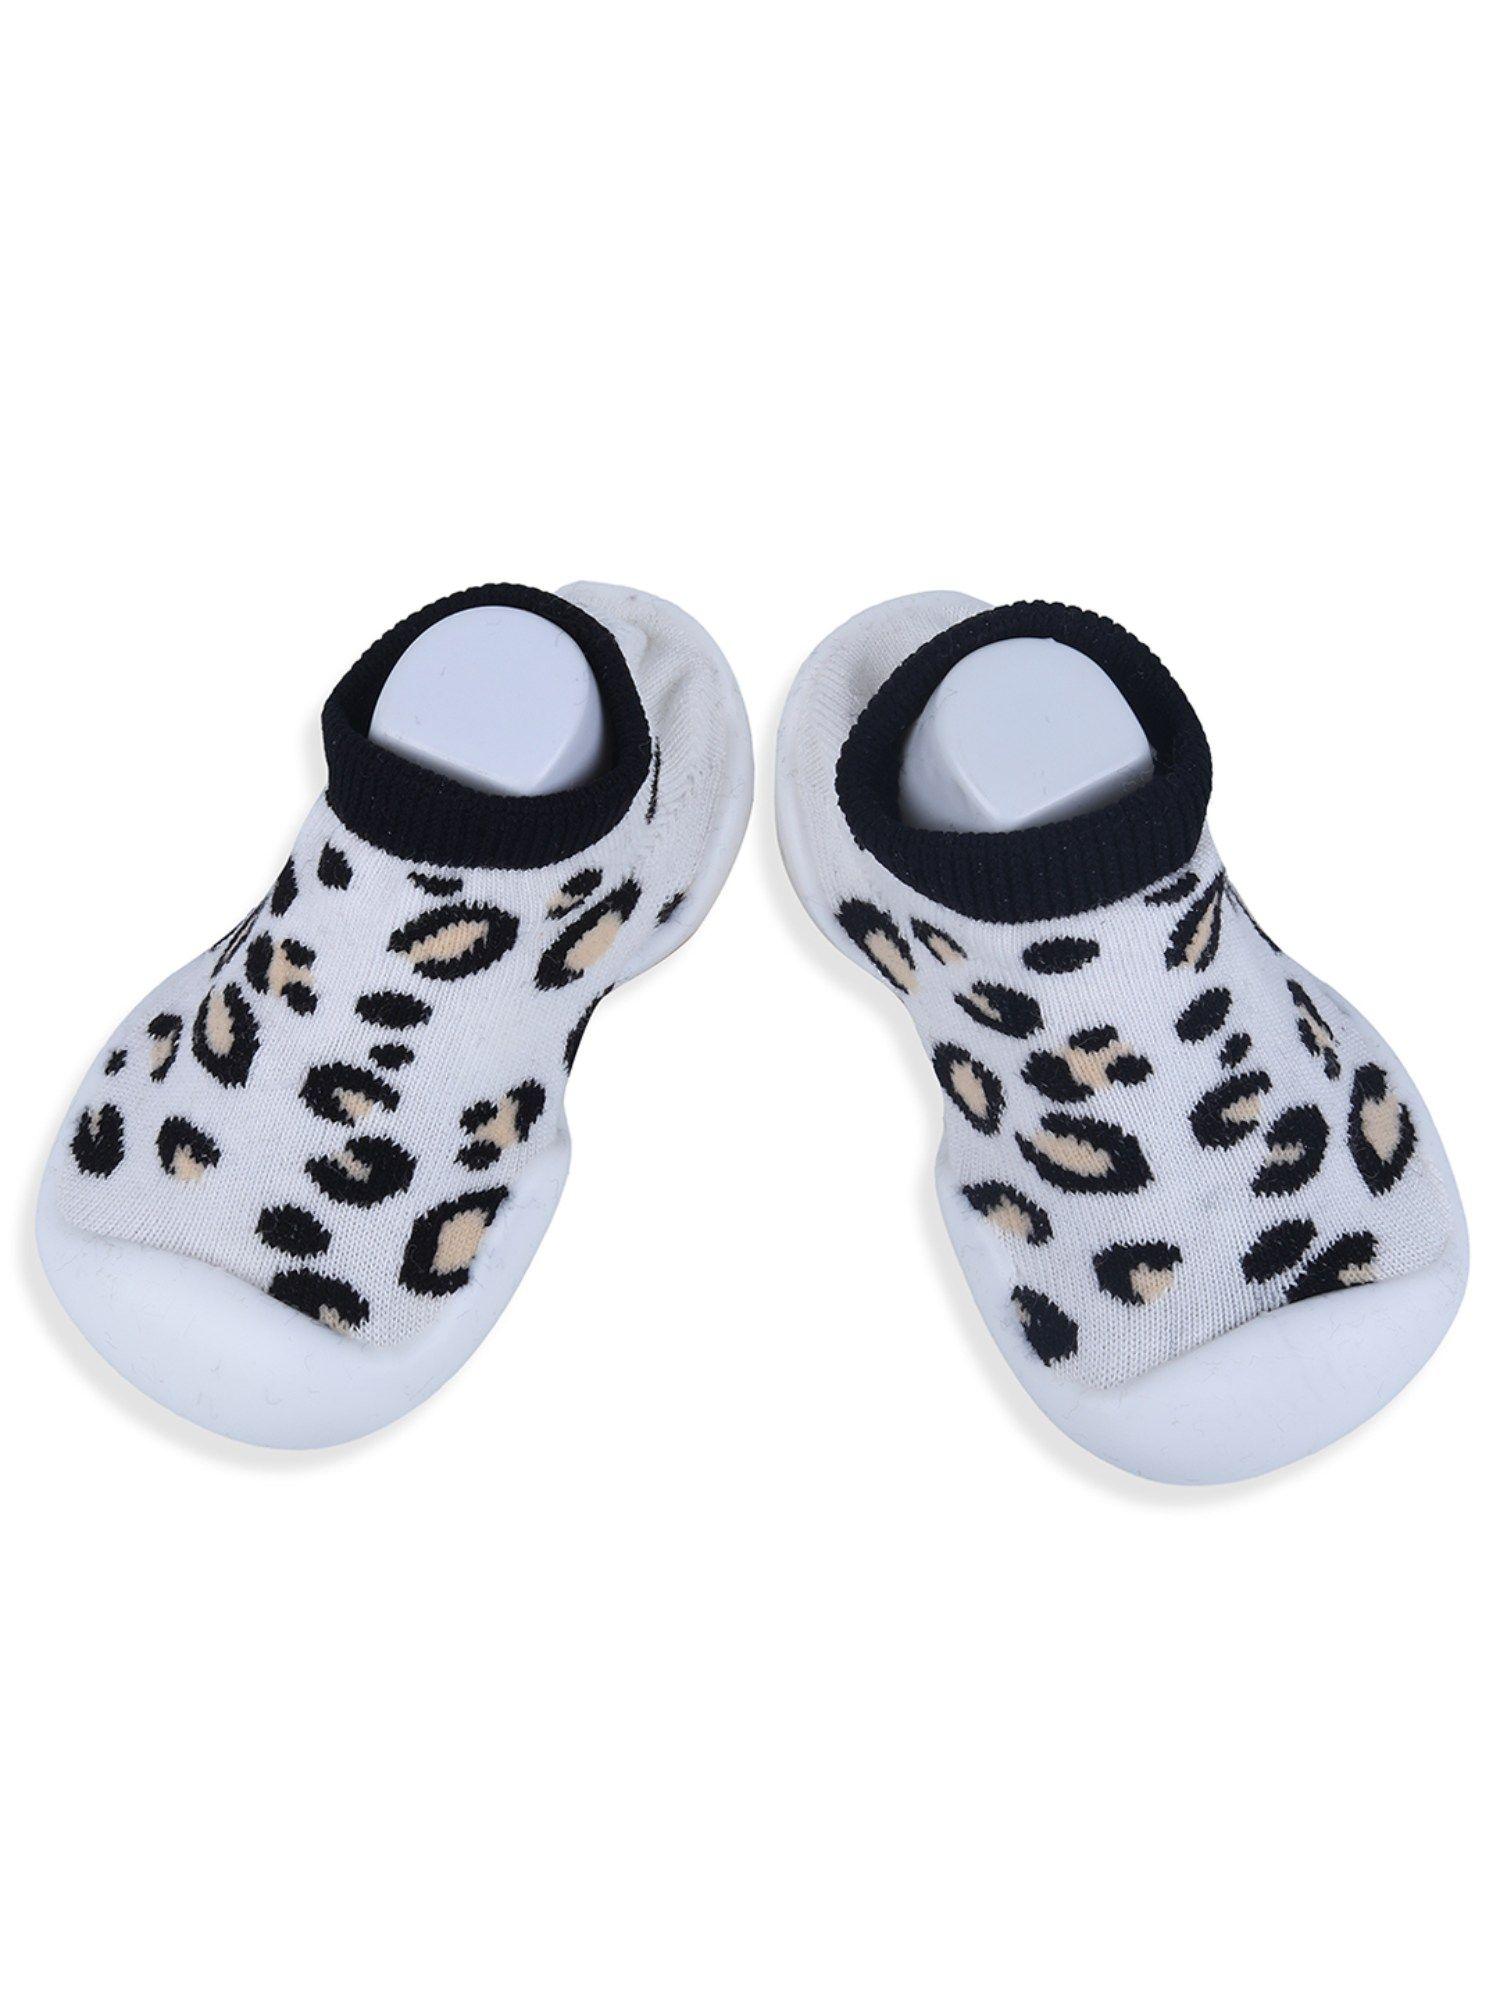 Leopard Print Rubber Comfortable Sole Slip-On Sock Shoes - White